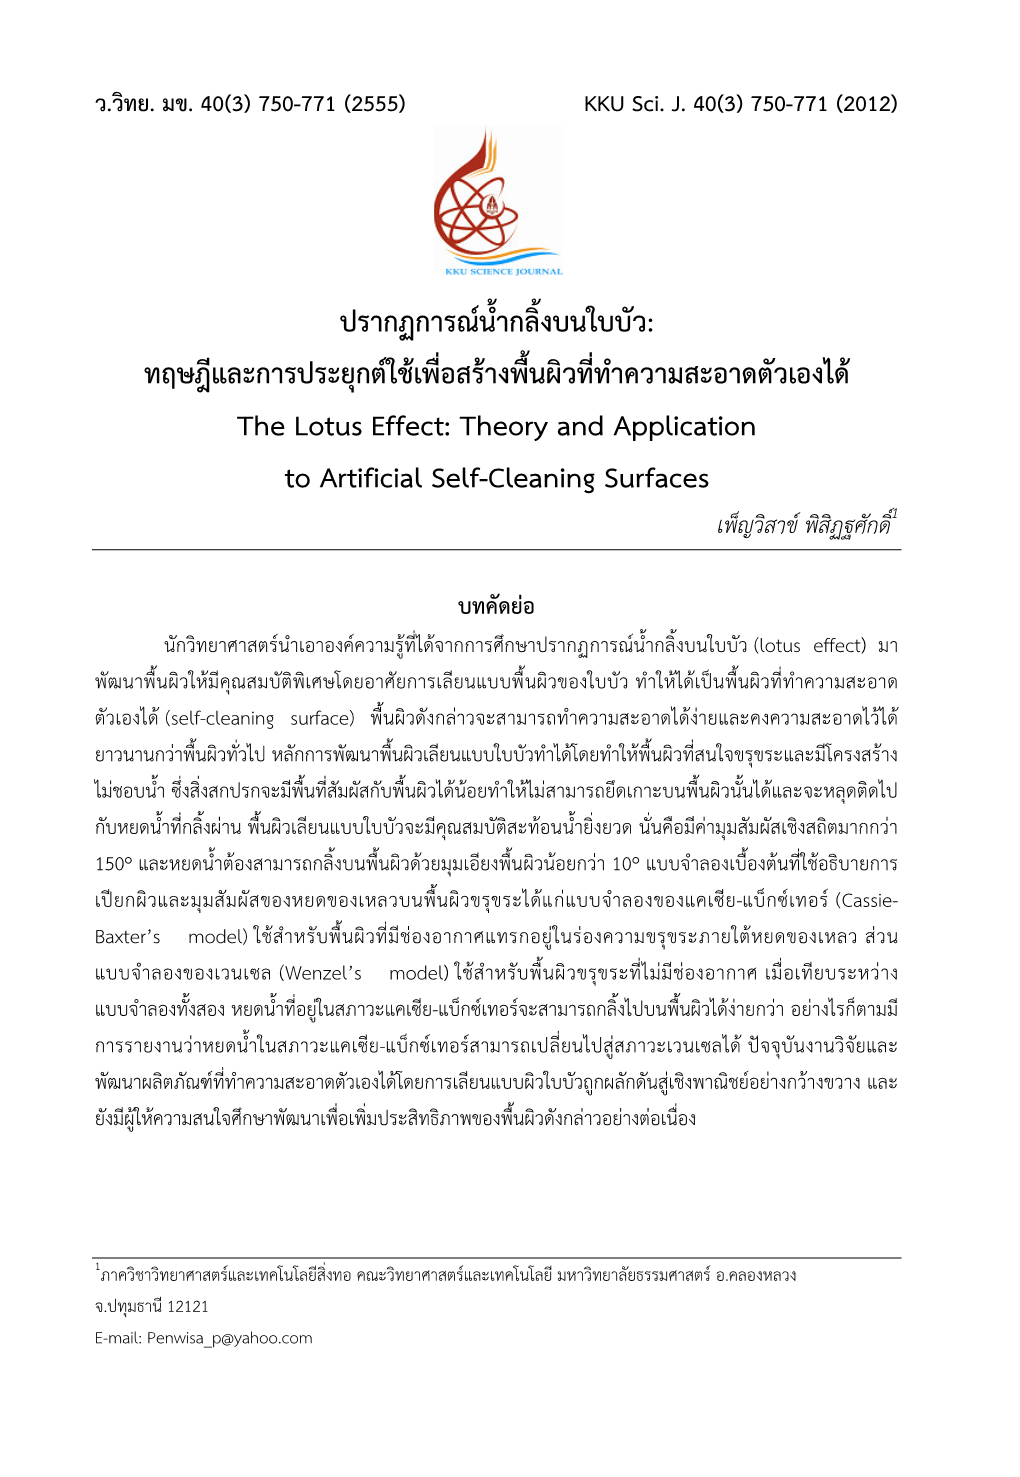 Theory and Application to Artificial Self-Cleaning Surfaces เพ็ญวิสาข พิสิฏฐศักดิ์1